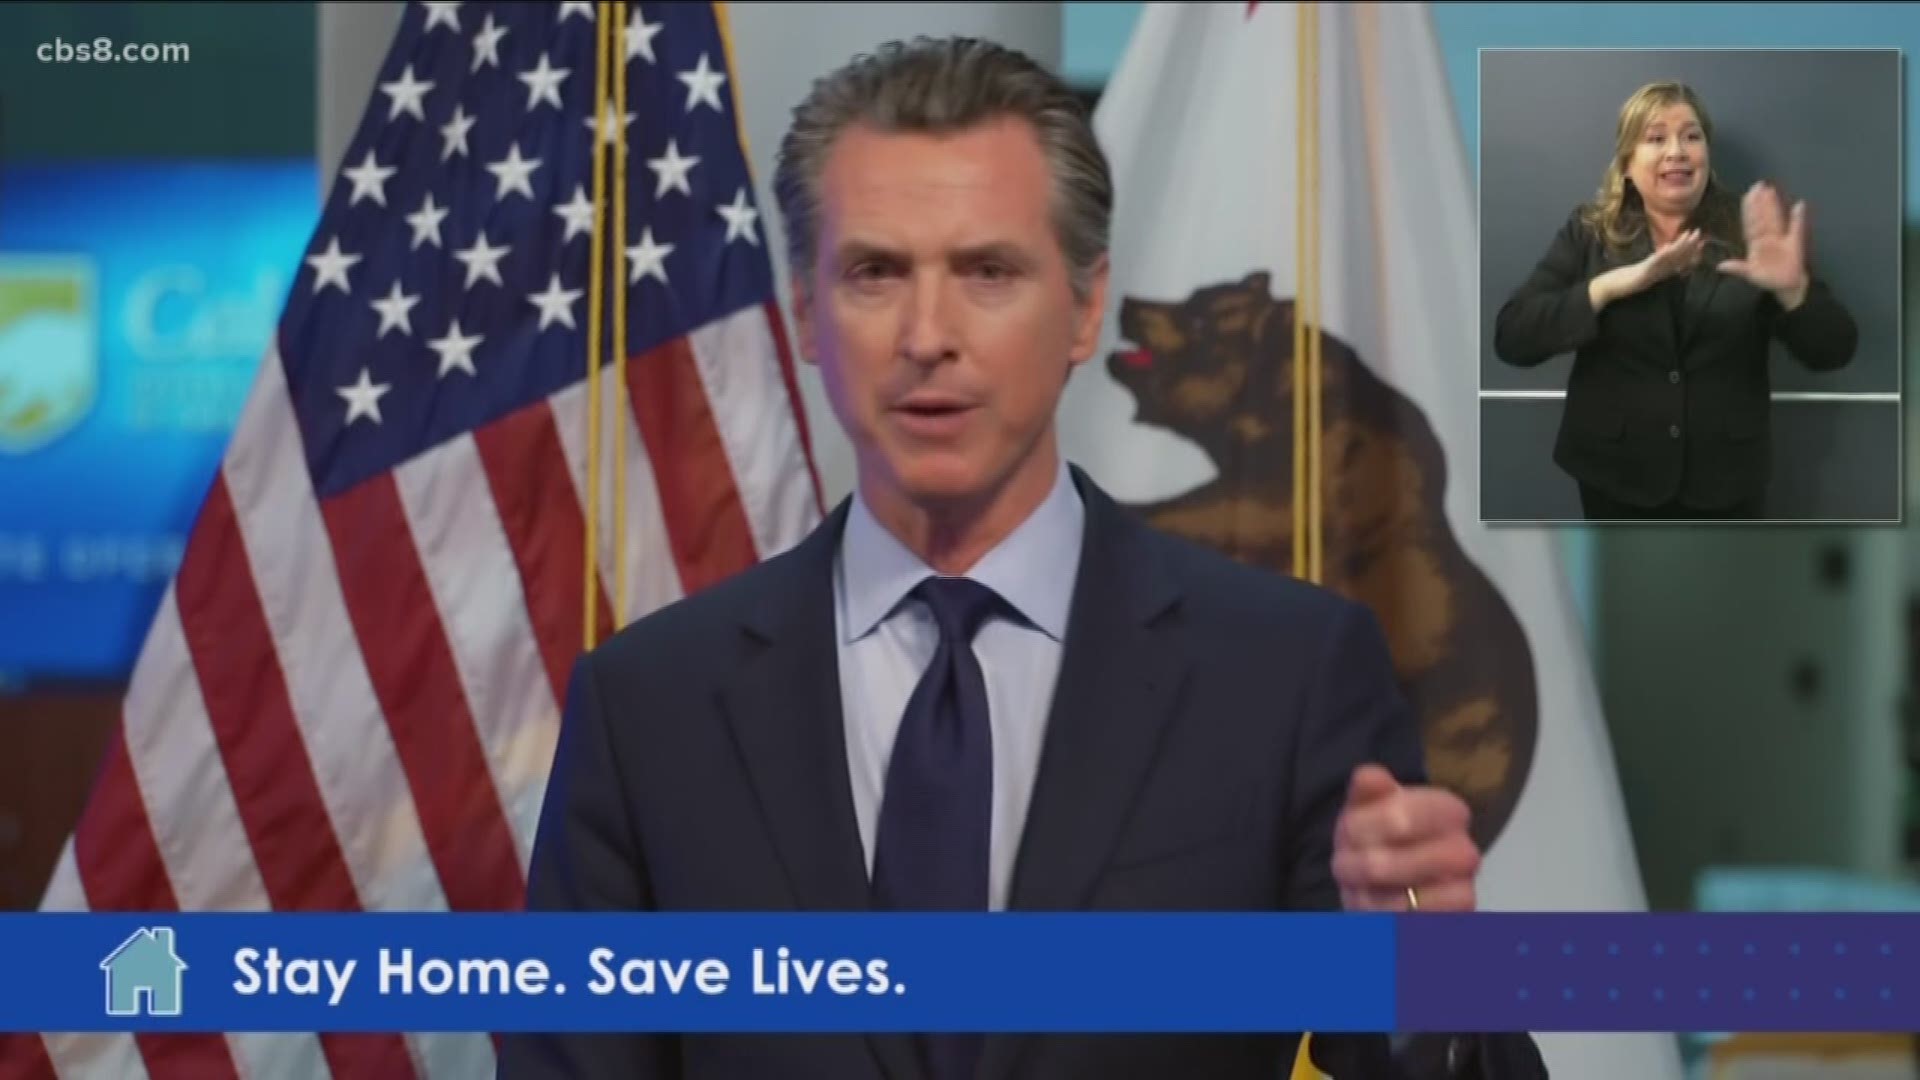 Newsom urged Californians to continue social distancing and prepare for a new sense of normal.